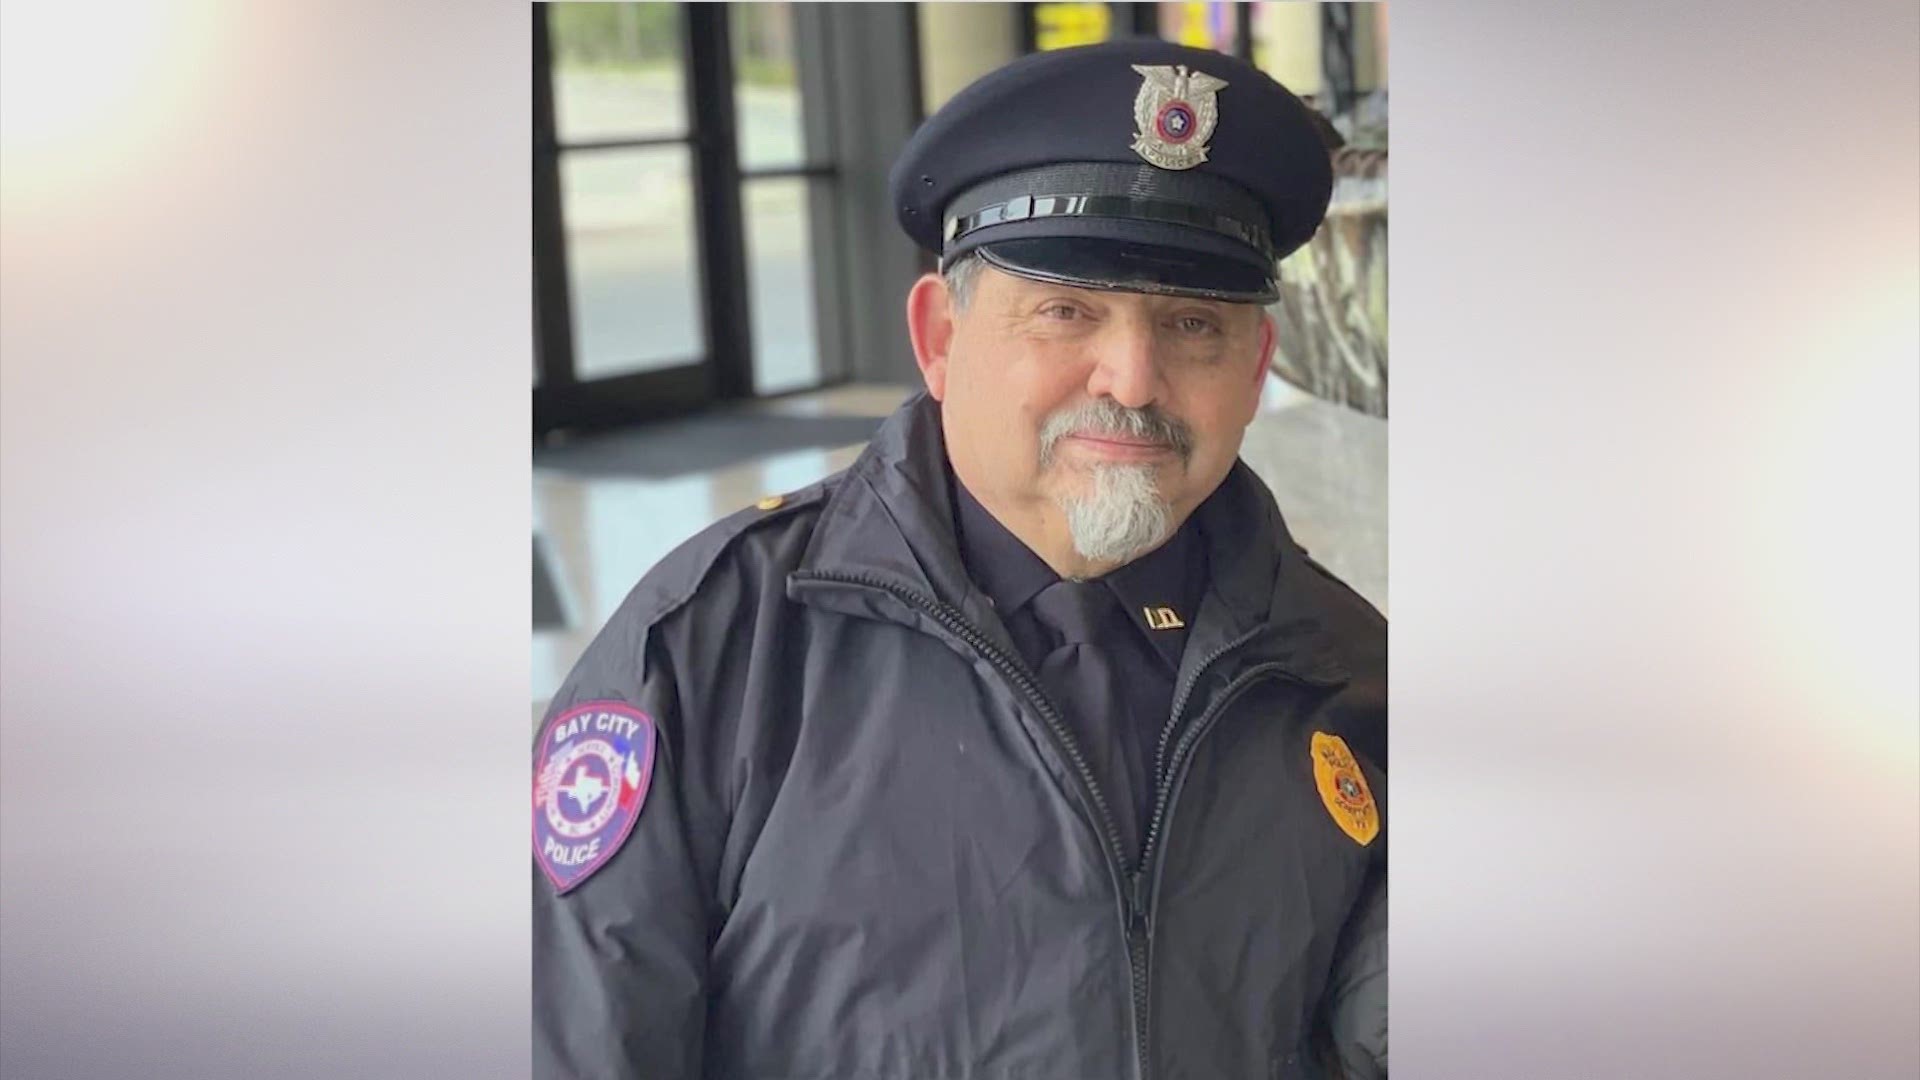 A Bay City police officer has died after a year-long battle with complications caused by COVID-19.